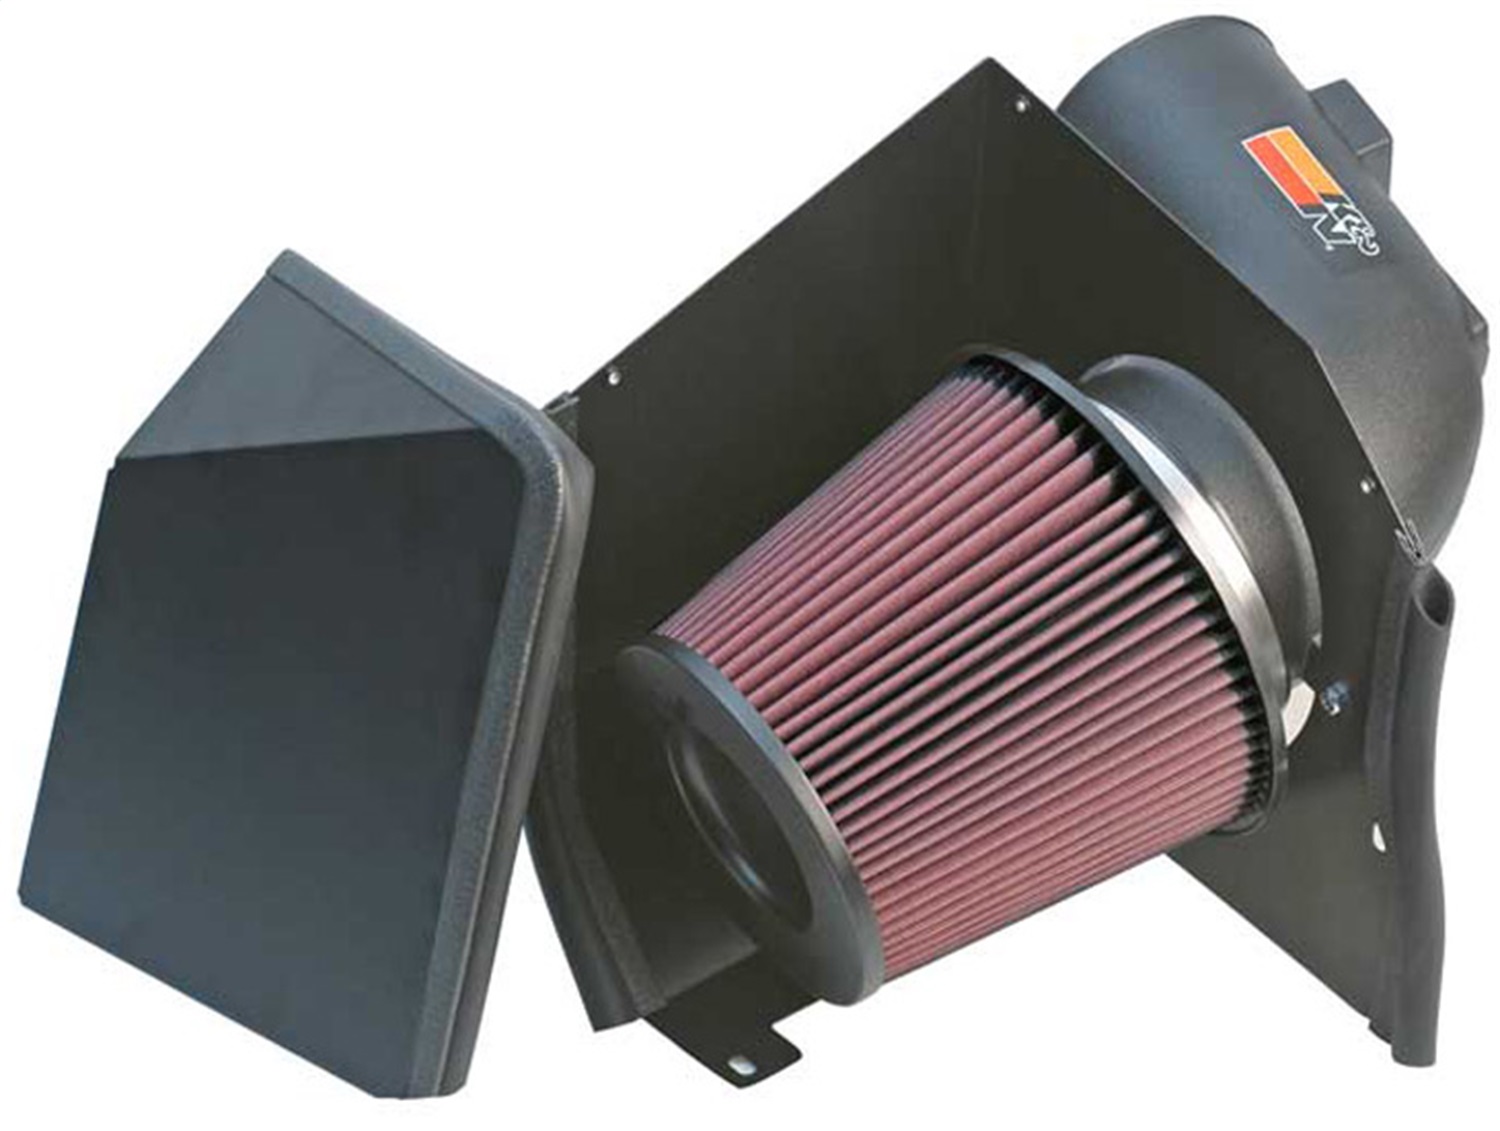 K&N Filters K&N Filters 57-3000 Filtercharger Injection Performance Kit